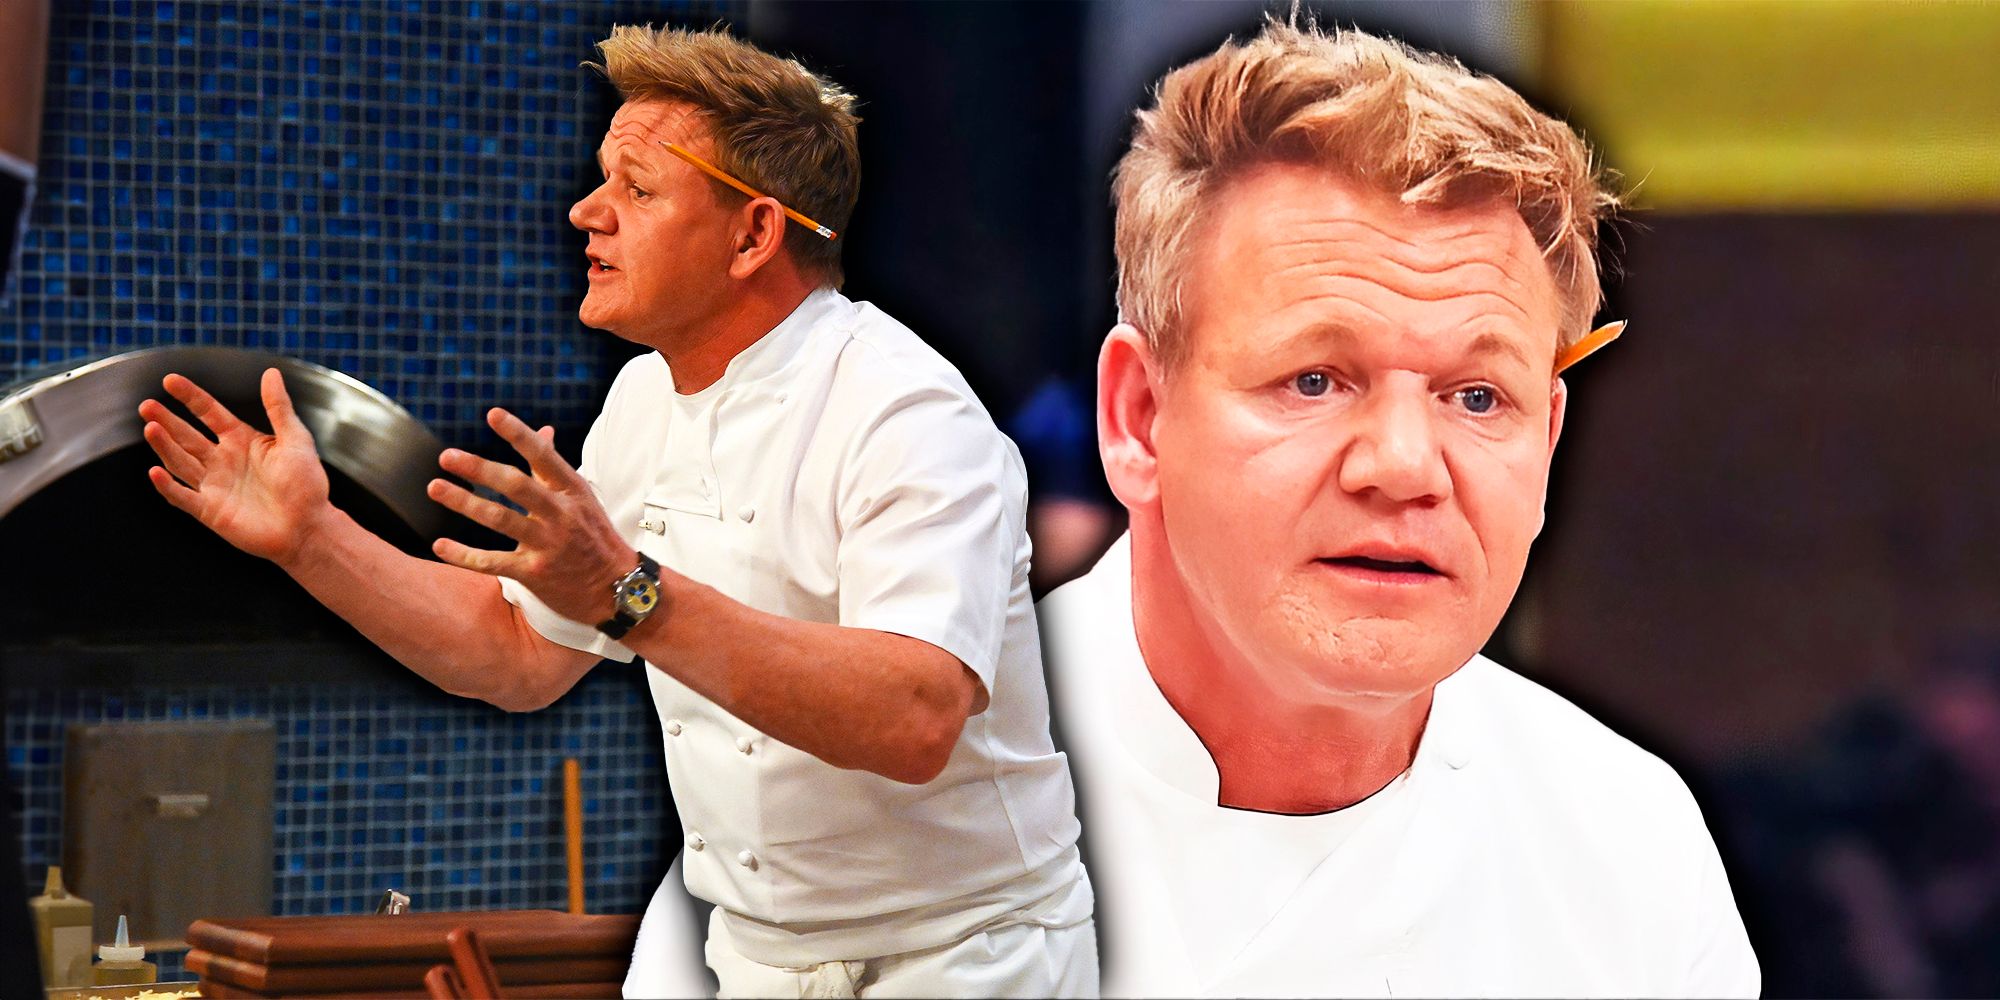 Hell's Kitchen-10 Times Gordon Ramsay Went Too Far ramsay angry montage